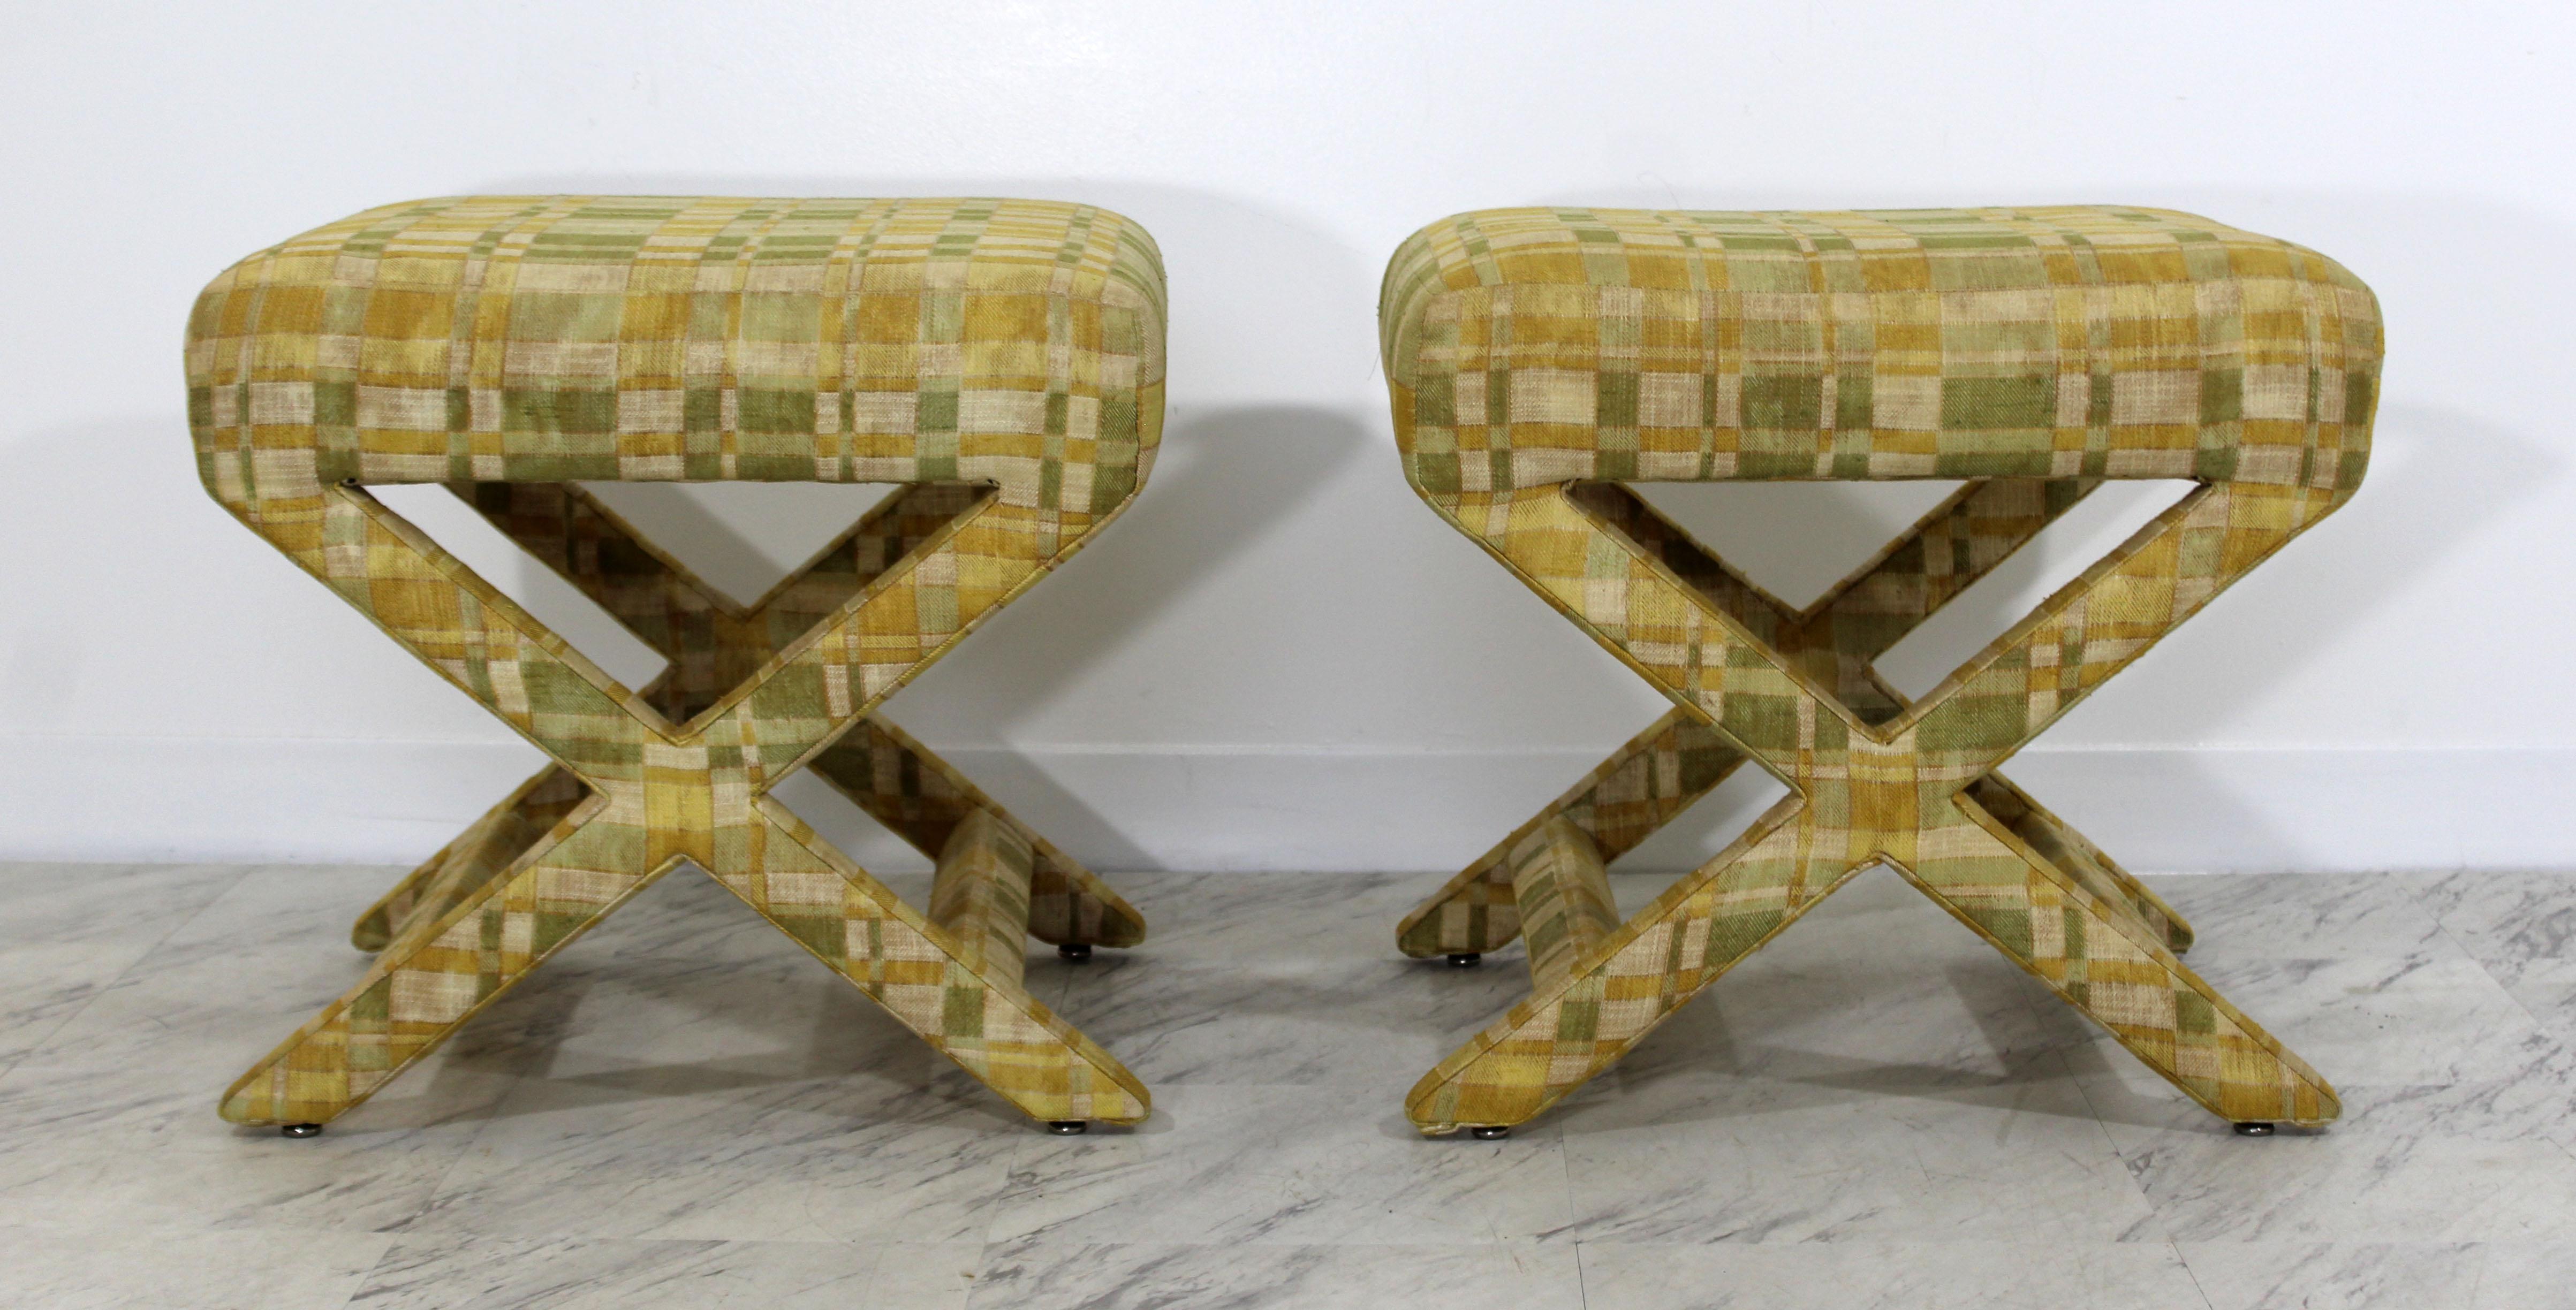 For your consideration is a gorgeous pair of X-based benches, stools or ottomans, by Billy Baldwin, circa the 1960s. In excellent condition. The dimensions of each are 21